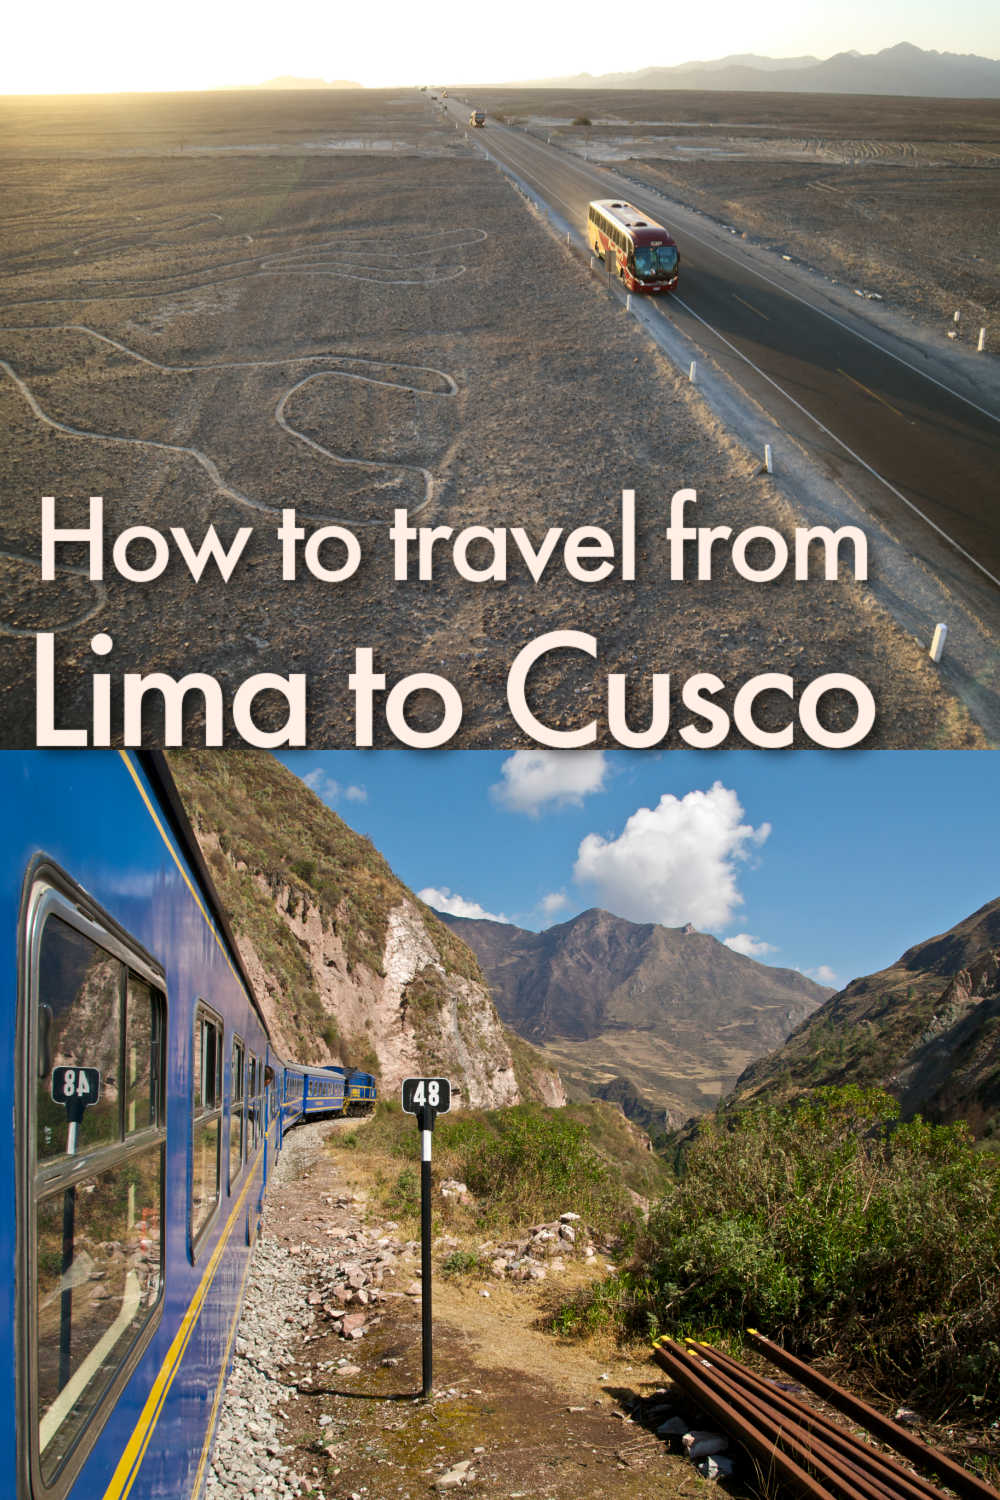 A practical guide to travel from Lima to Cusco by bus, train, and flights. How to buy the bus tickets, what is included in the price, how to plan your bus trip, and what to expect from the long bus ride. Plus tips on how to get from Lima to Cusco by train (there is no direct train, btw) and how you can plan the ultimate scenic ride from Lima to Cusco in Peru. 